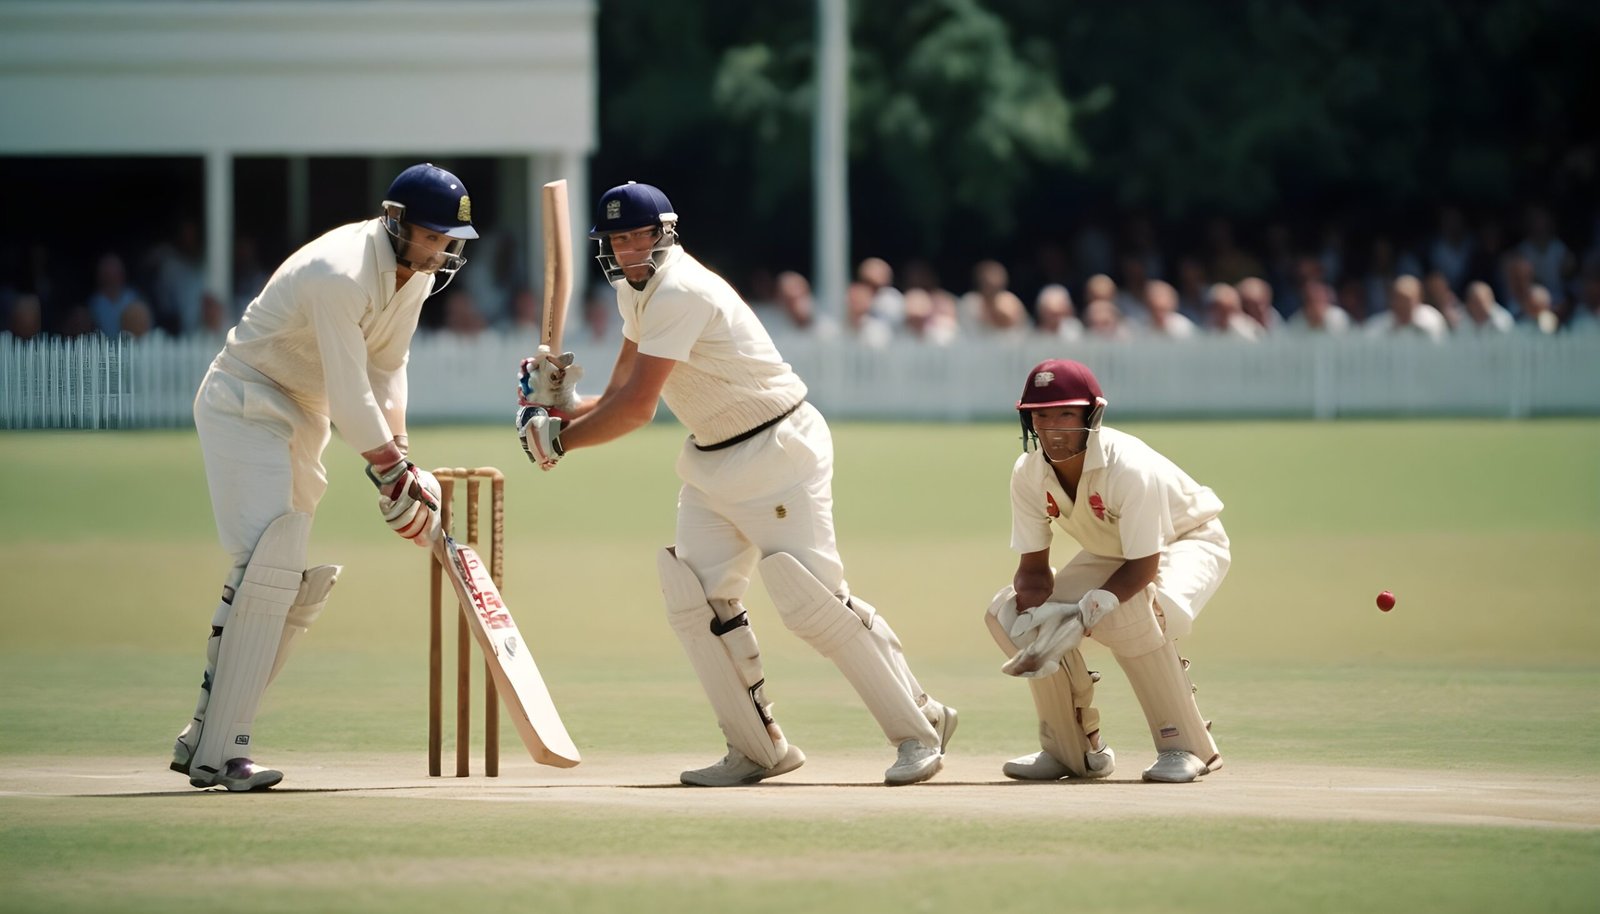 The Top 10 Most Memorable Cricket Matches Ever